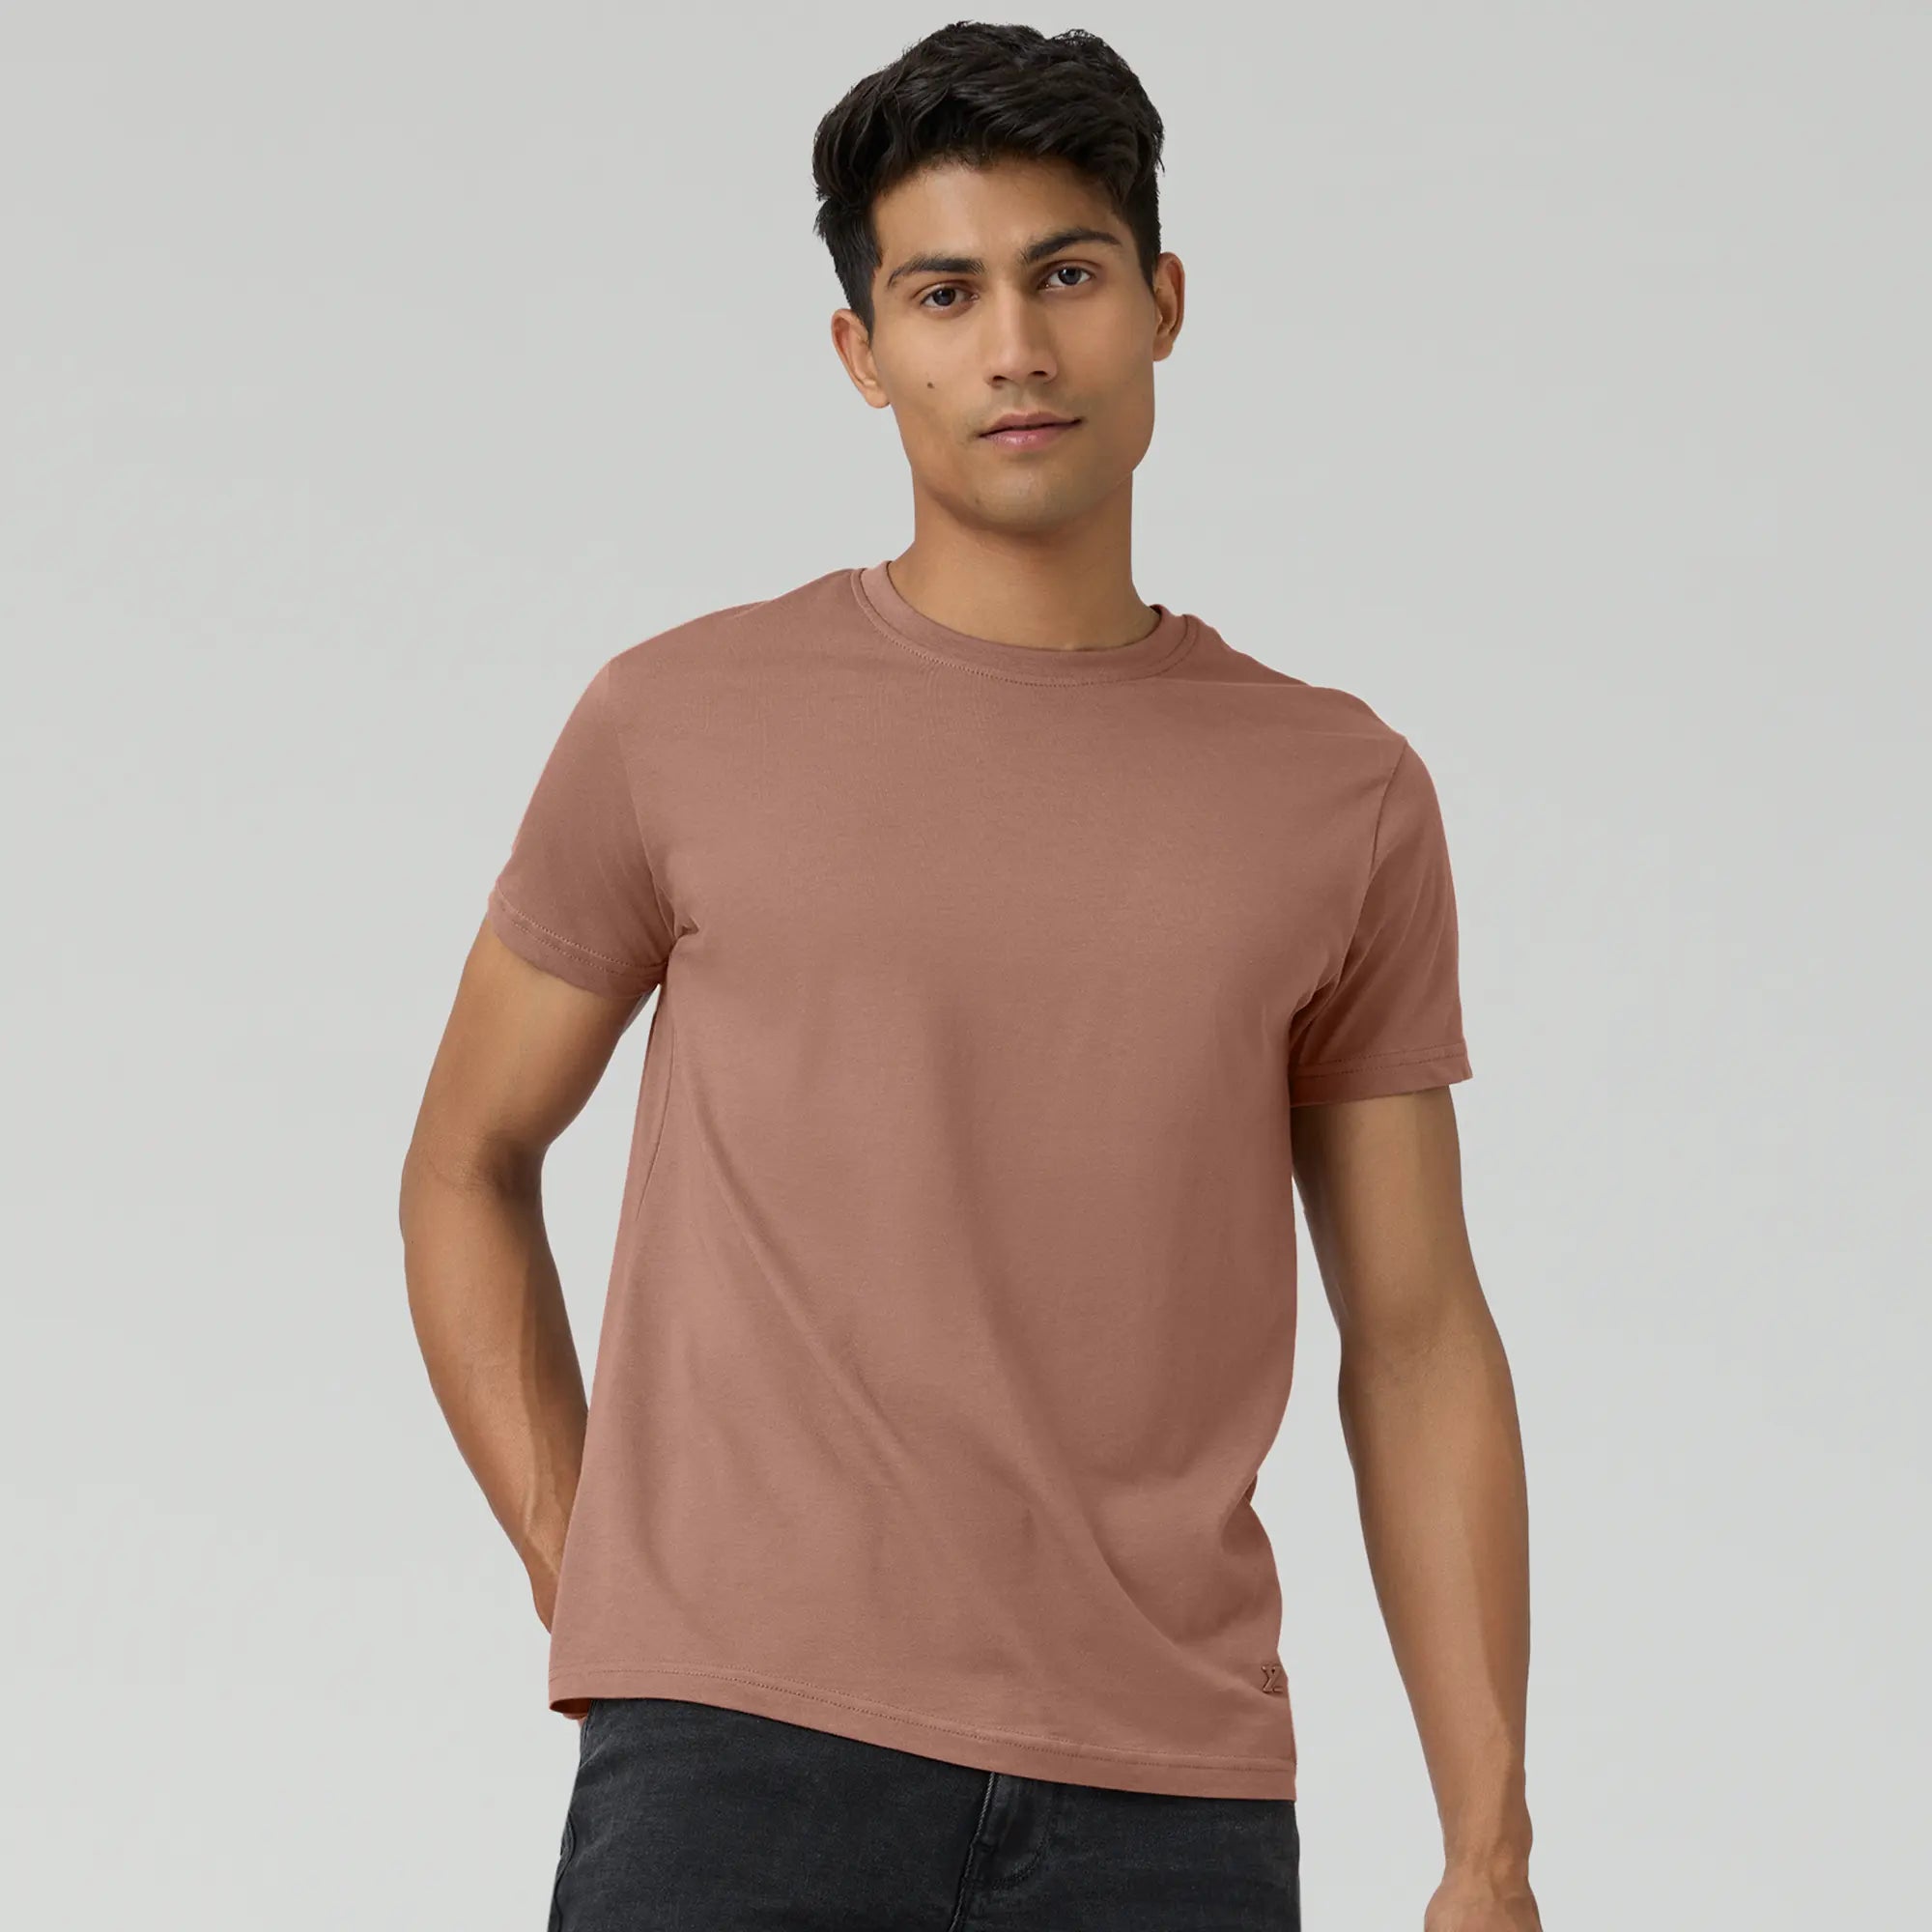 Pace Combed Cotton T-shirts For Men Brown Latte - XYXX Crew